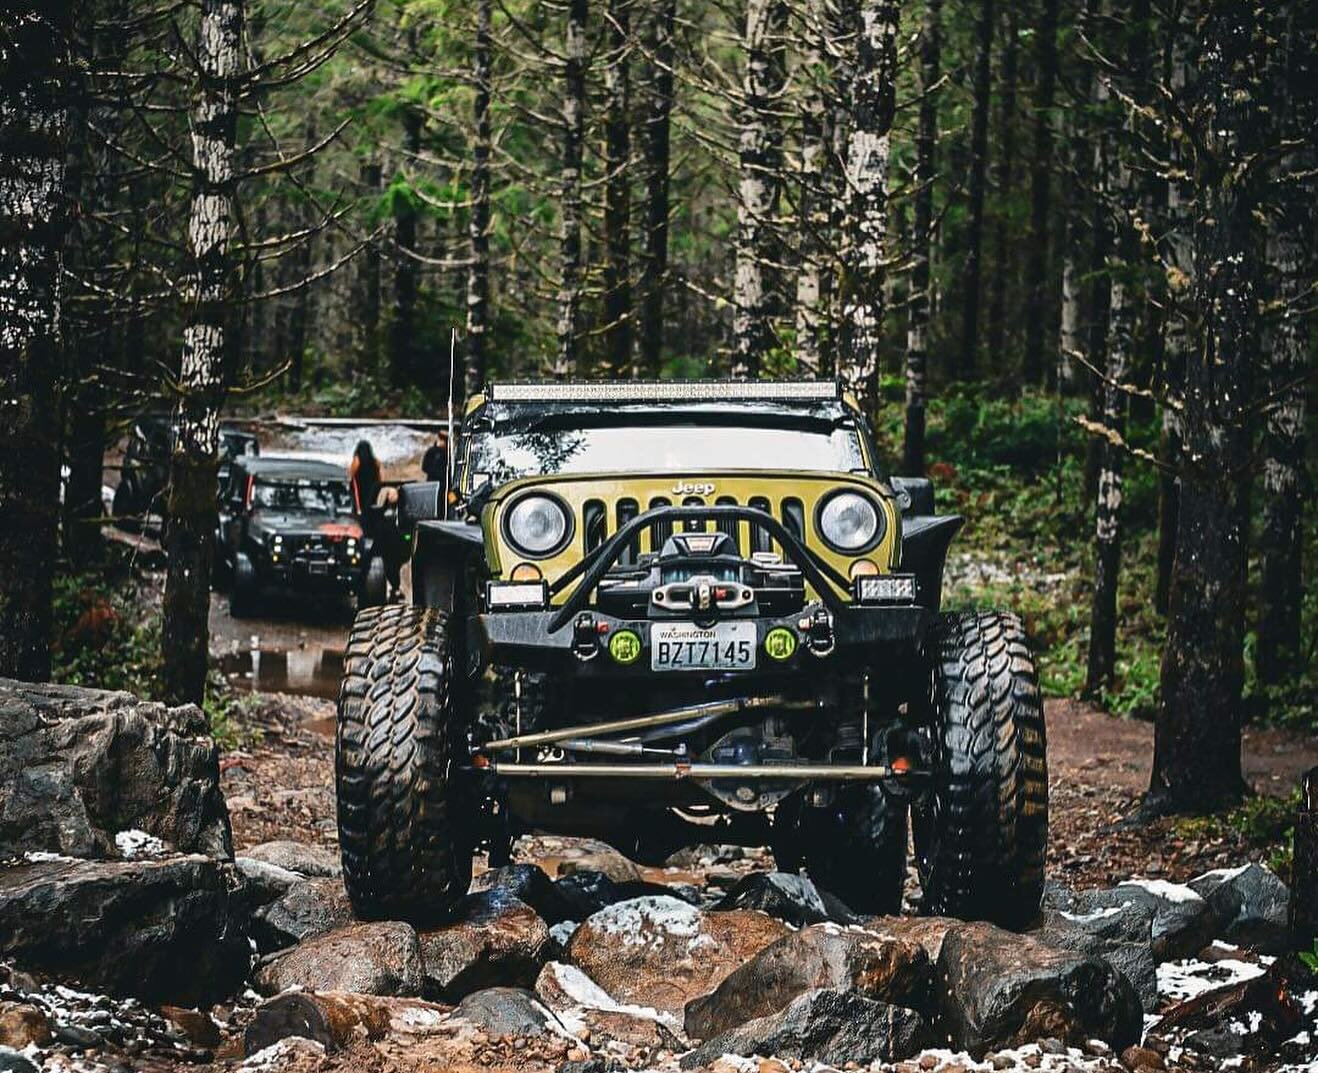 Where did your weekend take you? Tahuya ORV is particularly muddy at the moment 💩

We've got a coin for that! Check out our inventory www.trailcoinsusa.com 

📸 @sweetjudy_jku 

Trailcoinsusa.com 

Custom Challenge Coins and apparel to commemorate y